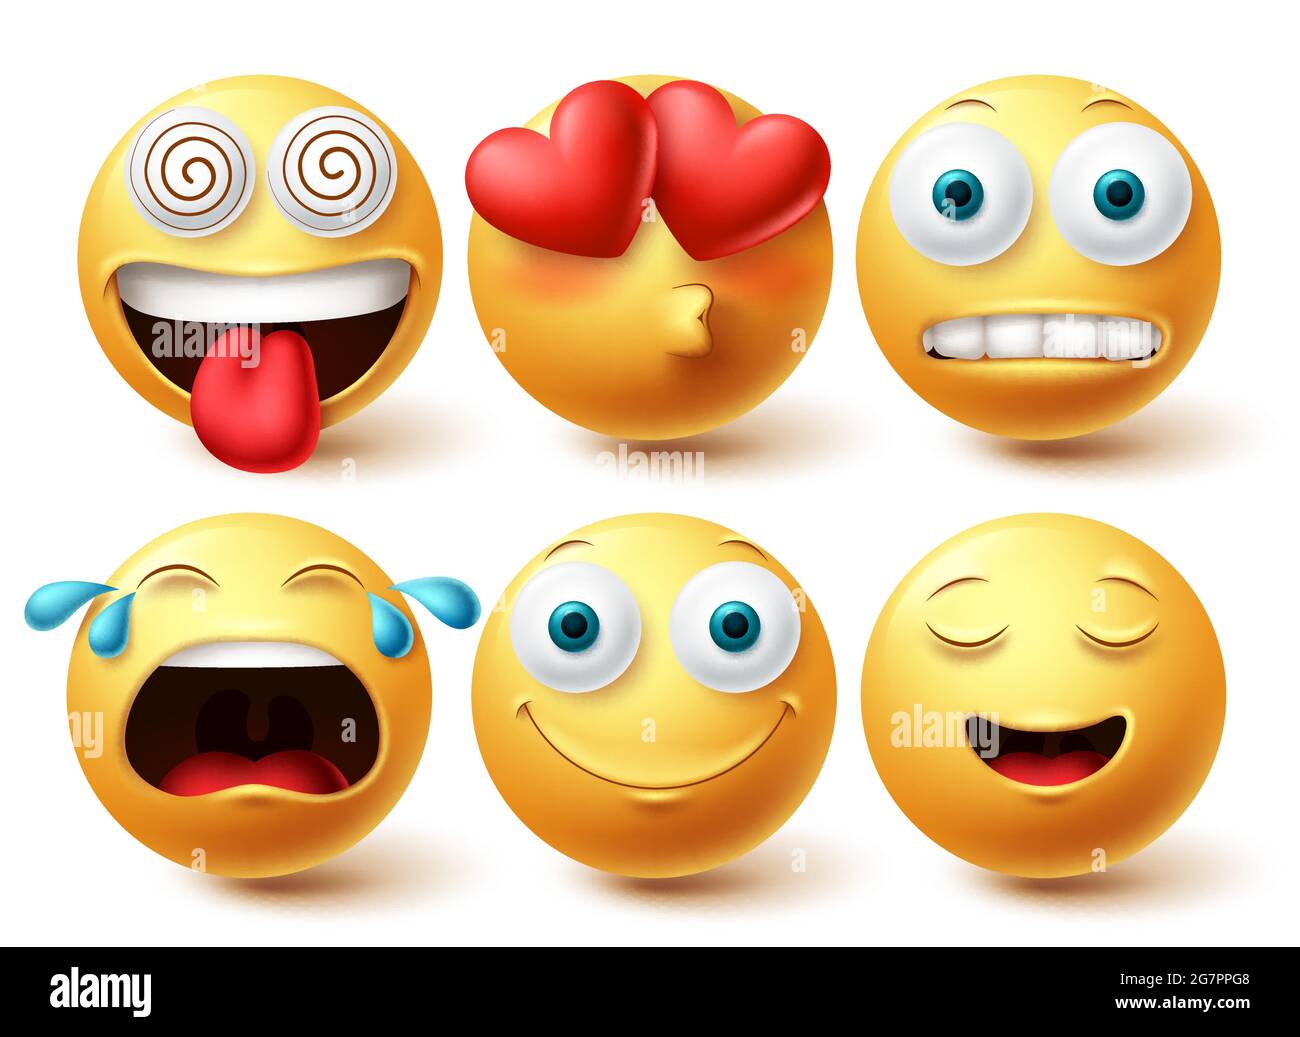 Smiley emoji vector set. Smileys emoticon happy, in love and crying faces icon collection isolated in white background. Vector illustration Stock Vector